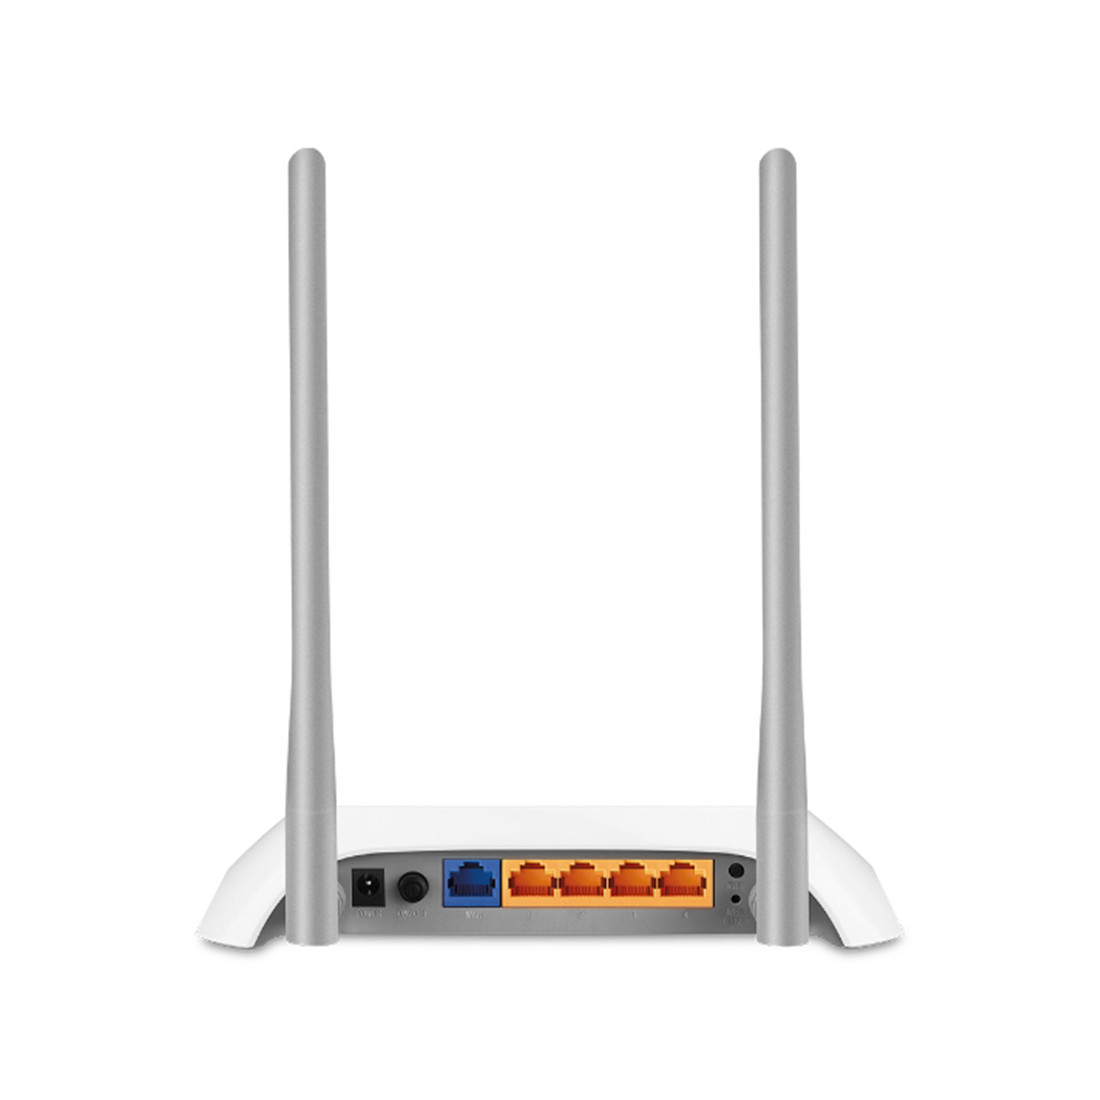 Маршрутизатор, TP-Link, TL-WR842N, 300 Мбит/с, 4 порта LAN 10/100 Мбит/с, 1 порт WAN 10/100 Мбит/с, 1 порт USB - фото 2 - id-p113449761